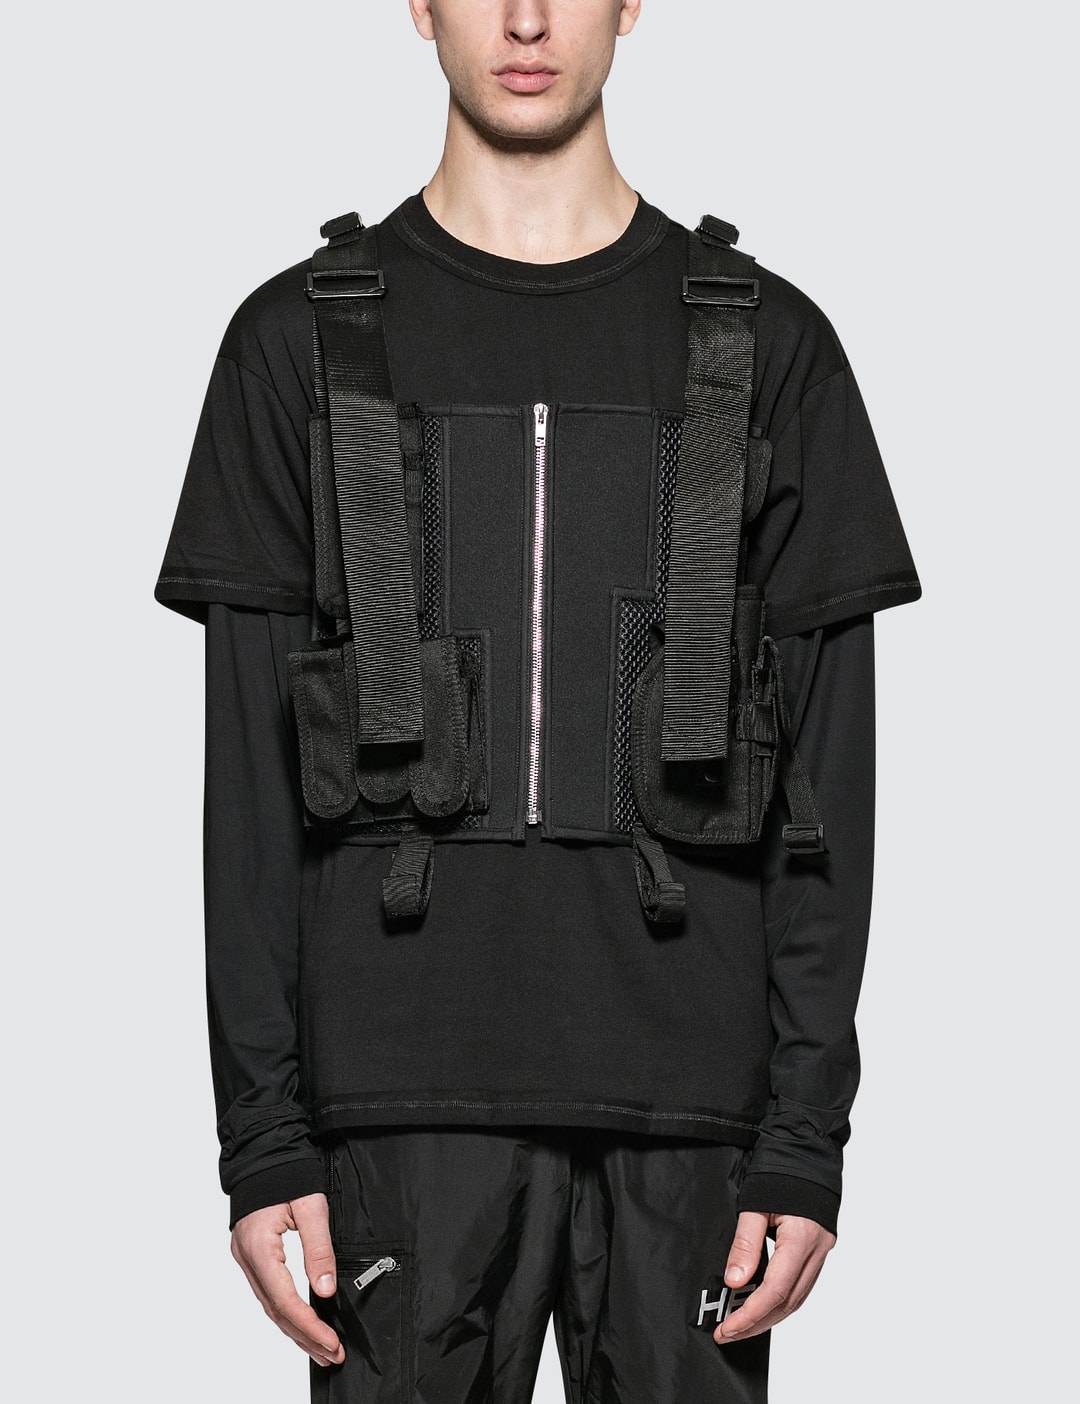 Op bandage stempel GEO - Tactical Vest | HBX - Globally Curated Fashion and Lifestyle by  Hypebeast